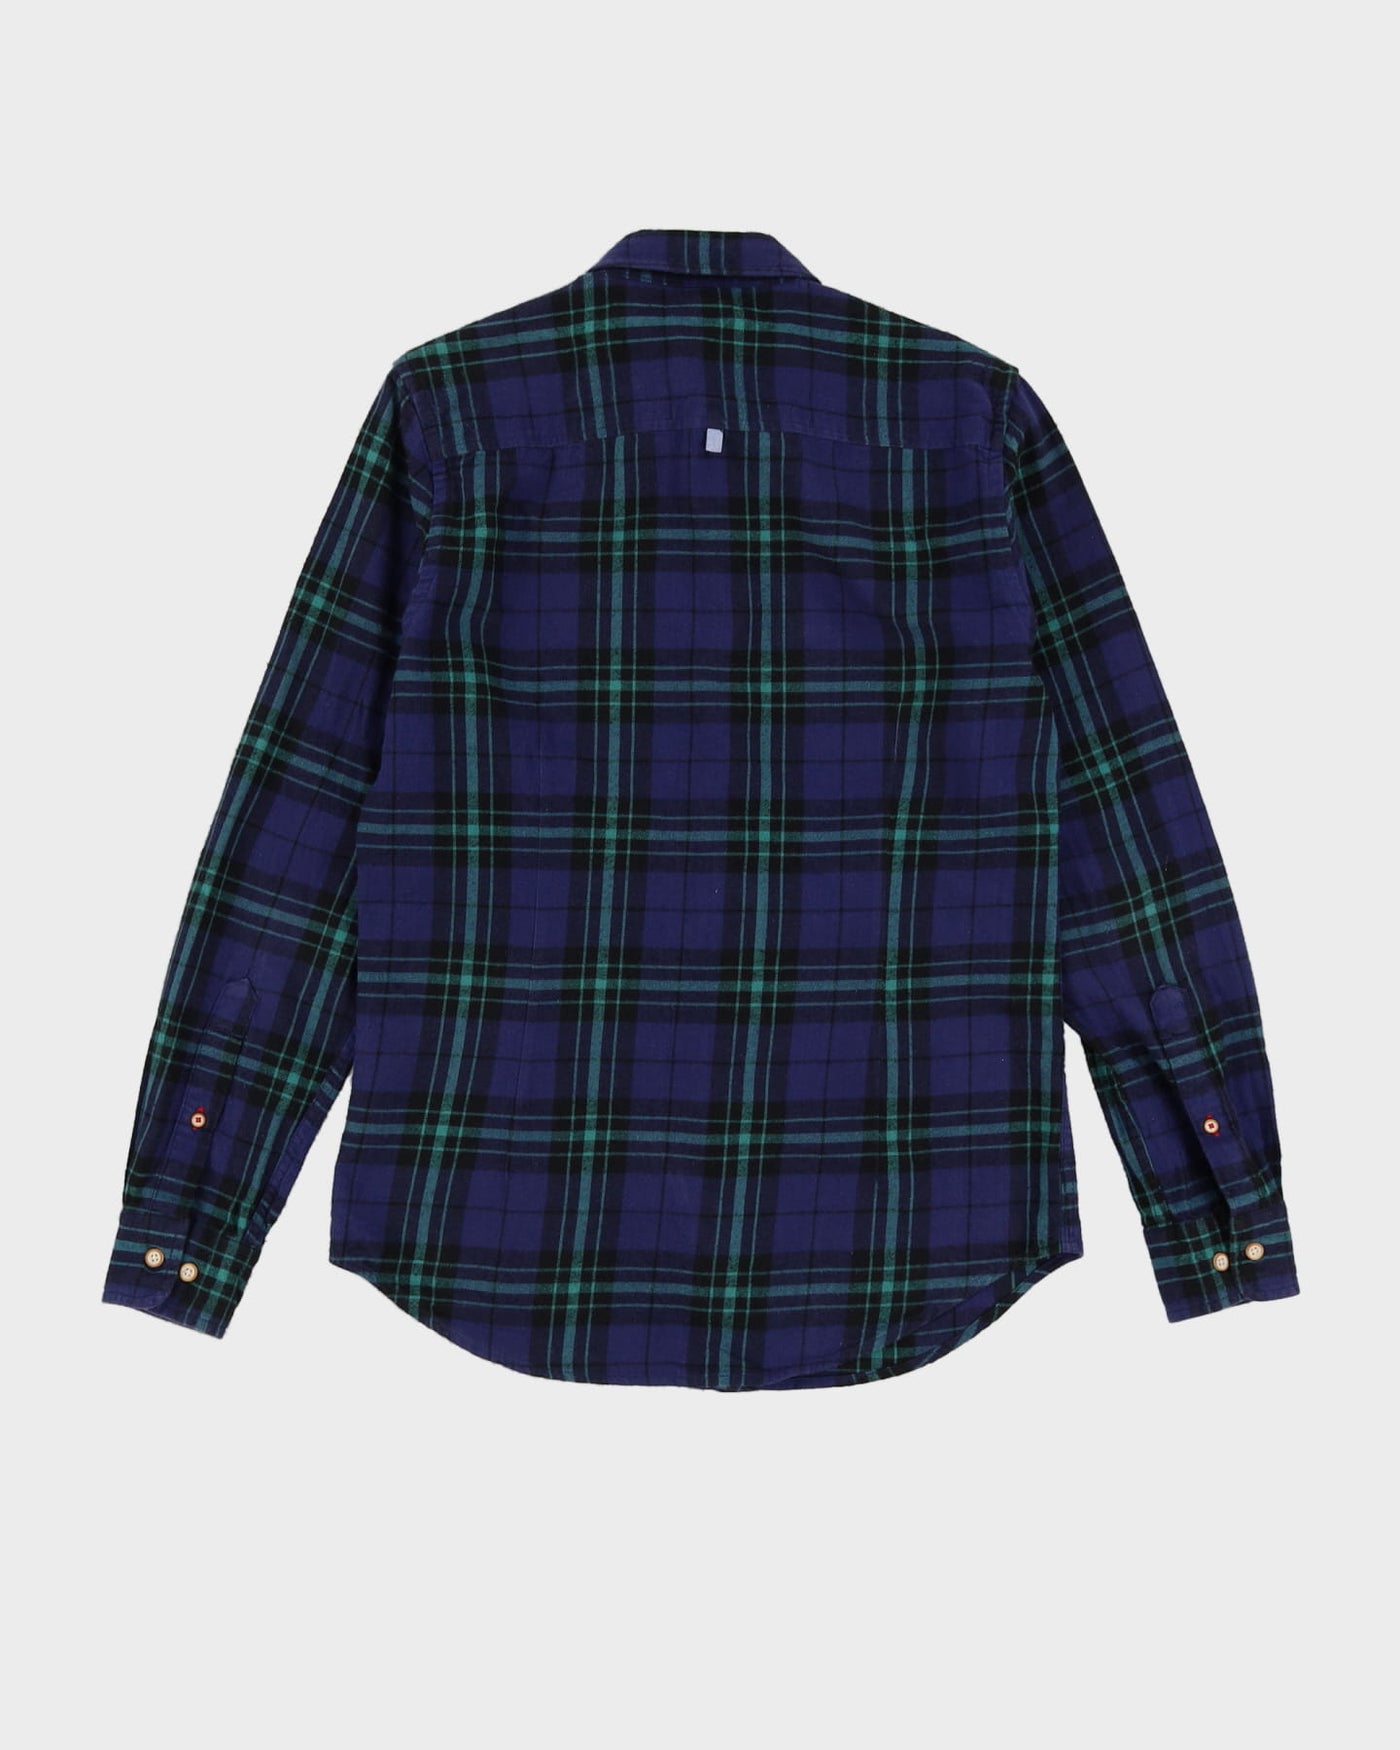 Benetton Navy Check Patterned Flannel Shirt - S